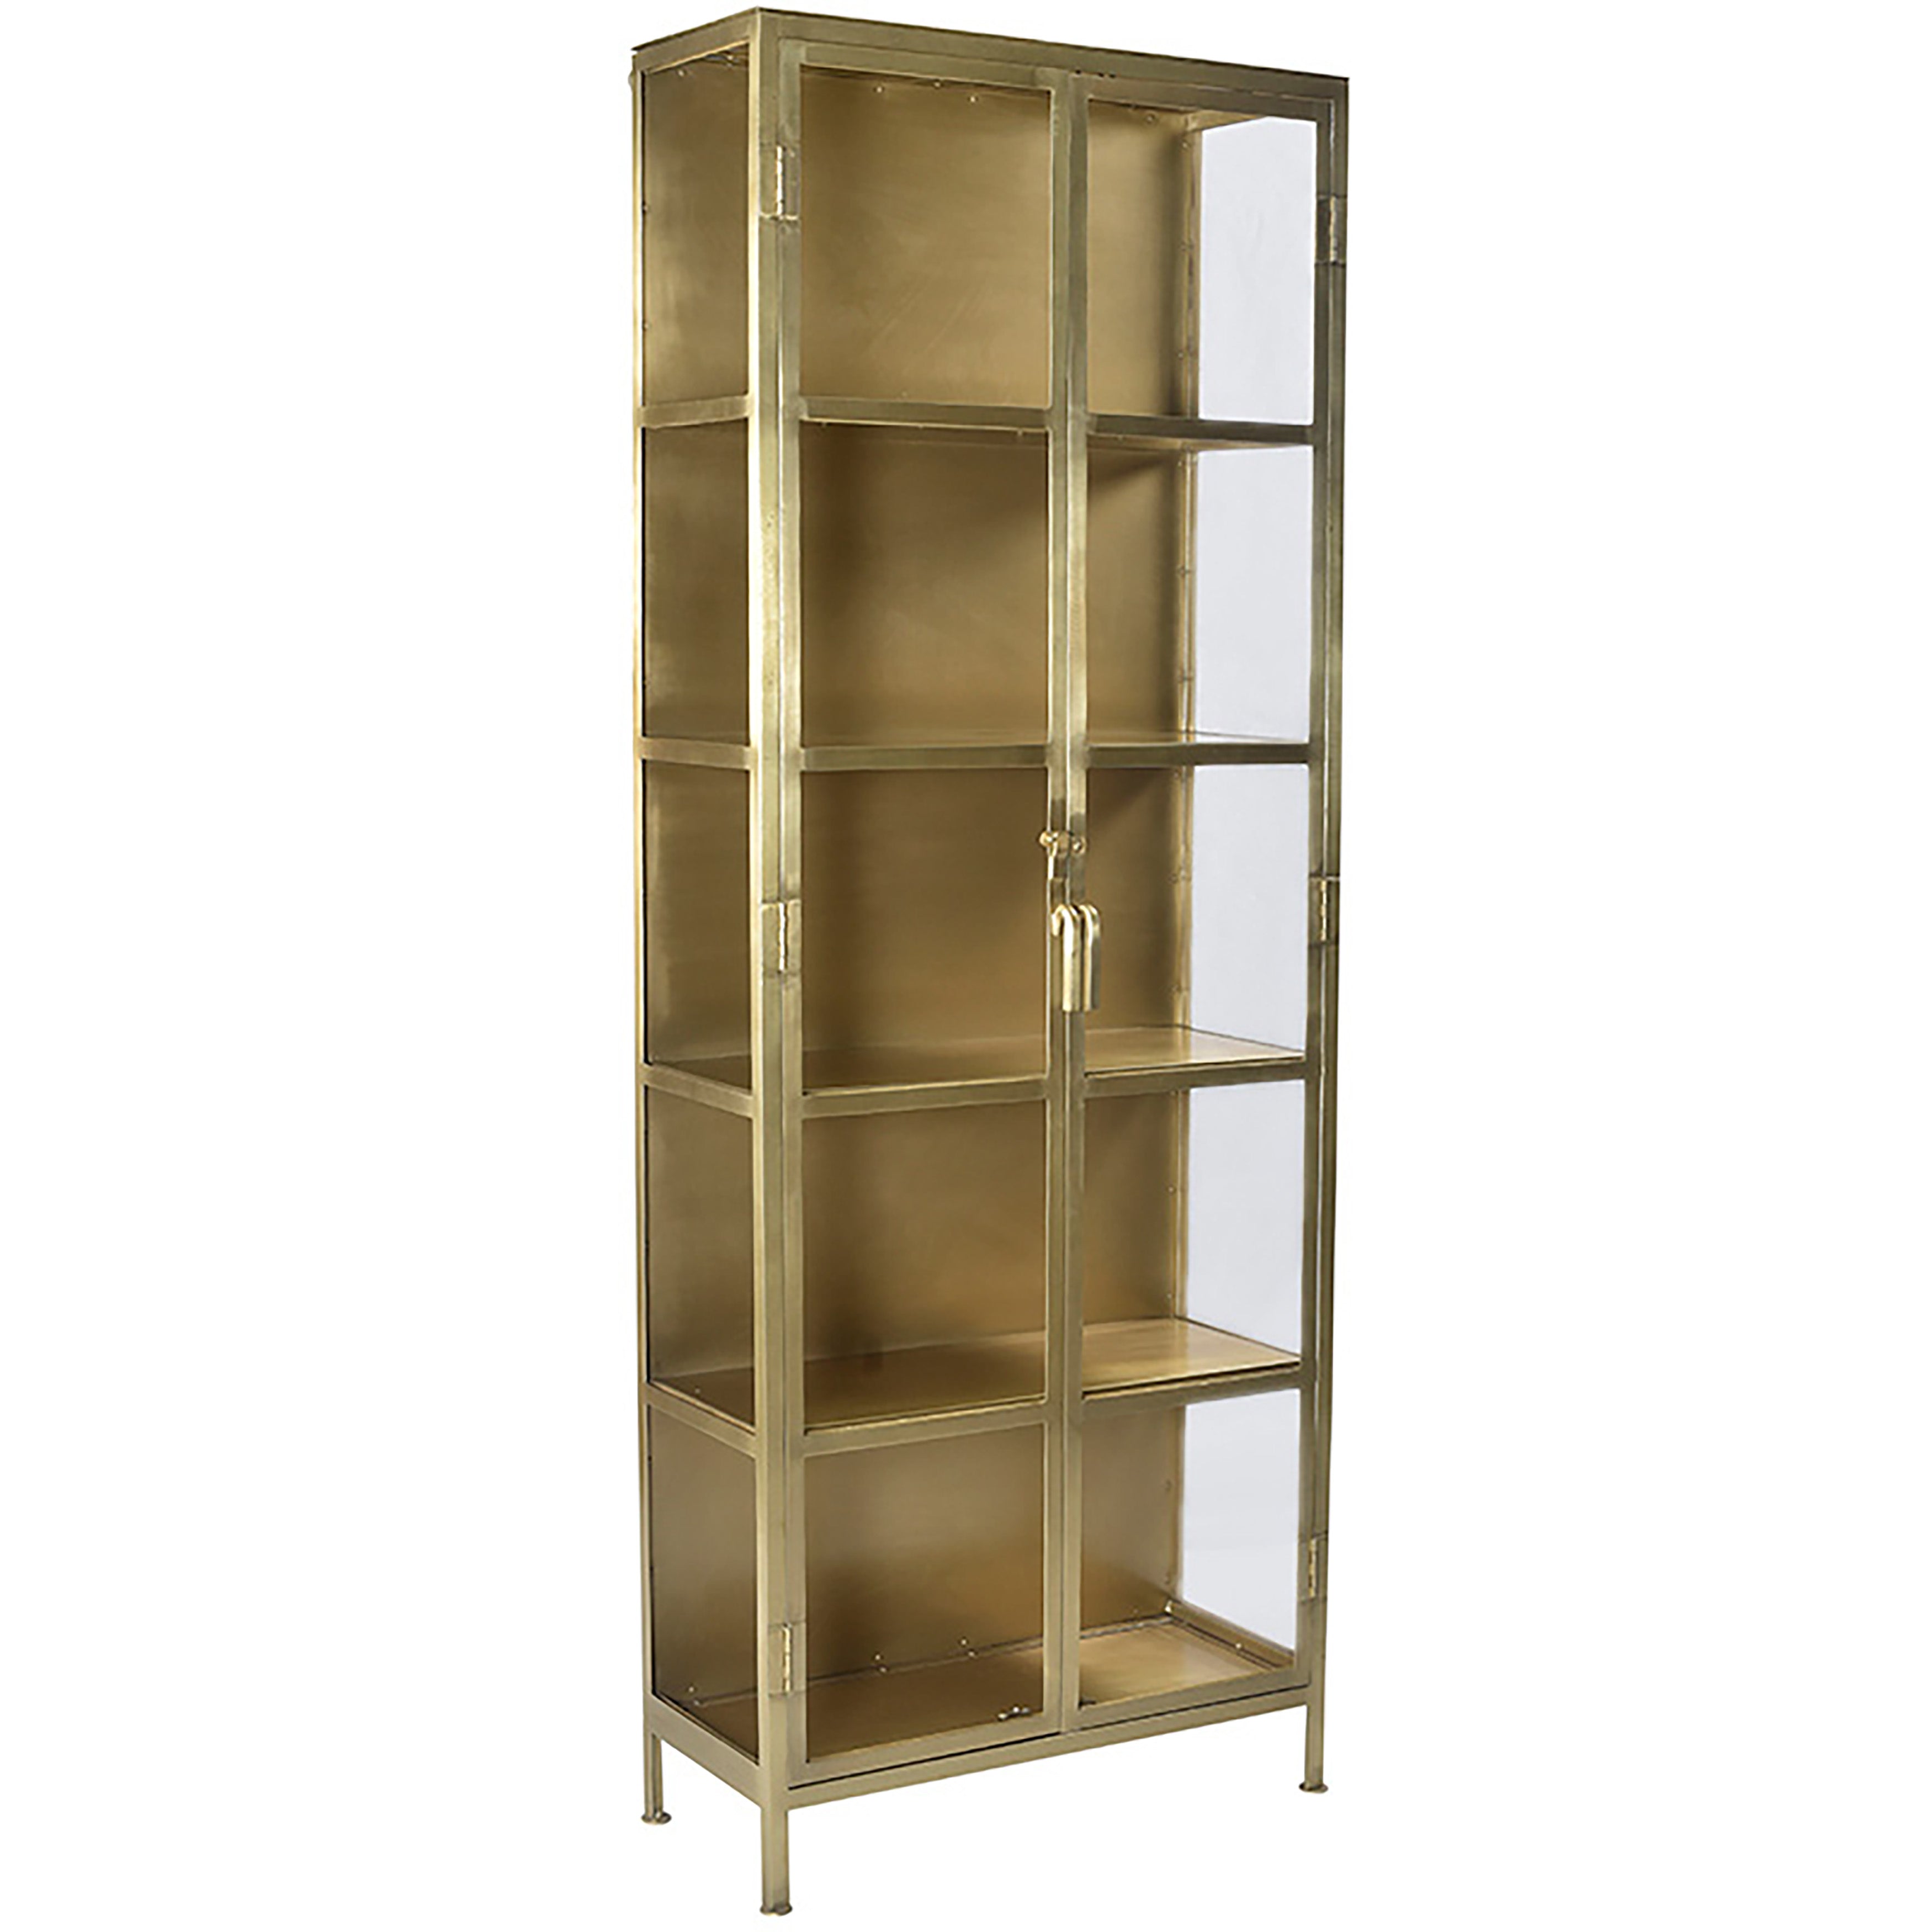 Classic and contemporary, this cabinet lends a versatile look in your living space. Crafted from a sleek iron frame in an antique brass finish with window-style paneling for an open look. This 84” cabinet features two glass doors and five shelf spaces for a roomy interior that creates a beautiful backdrop for décor, keepsakes, and books. Amethyst Home provides interior design, new home construction design consulting, vintage area rugs, and lighting in the Dallas metro area.